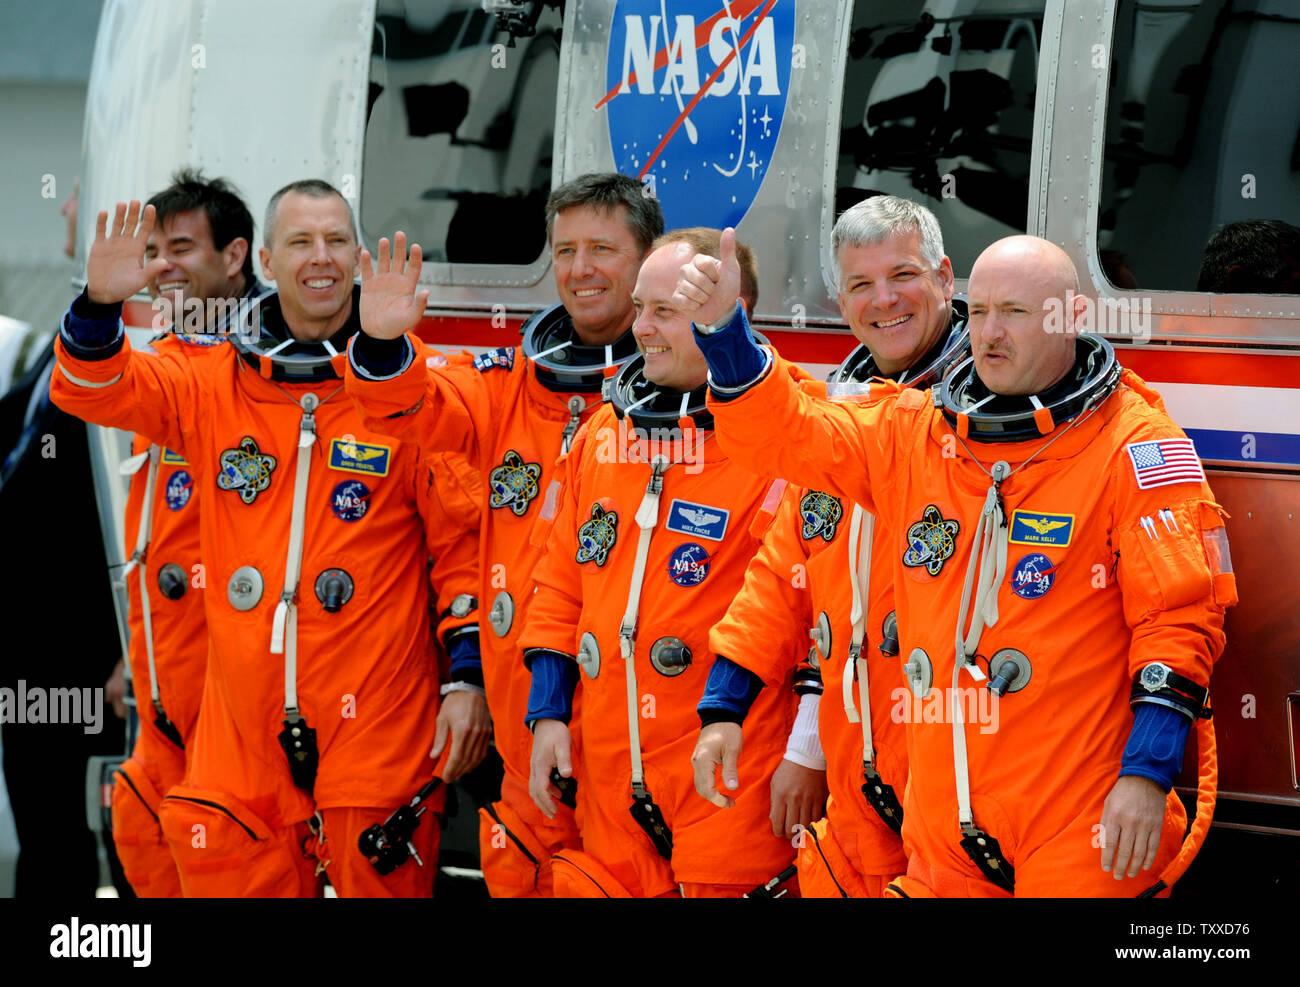 Space Shuttle Endeavour Commander Mark Kelly (right) gives the thumbs up after departing with his crew and boarding the Astrovan on their way to the launchpad for Endeavour's last flight at Kennedy Space Center on April 29, 2011.  The launch attempt was scrubbed minutes later. Behind Kelly is Pilot Greg Johnston and mission specialists  Mike Finke and Roberto Vittori, Drew Feustel, and Greg Chamitoff (left).  Kelly is the husband of Arizona Congresswoman Gabrielle Giffords, who was recovering from an assassination attempt and at the Cape to watch the possible liftoff.   UPI/ Pat Benic Stock Photo